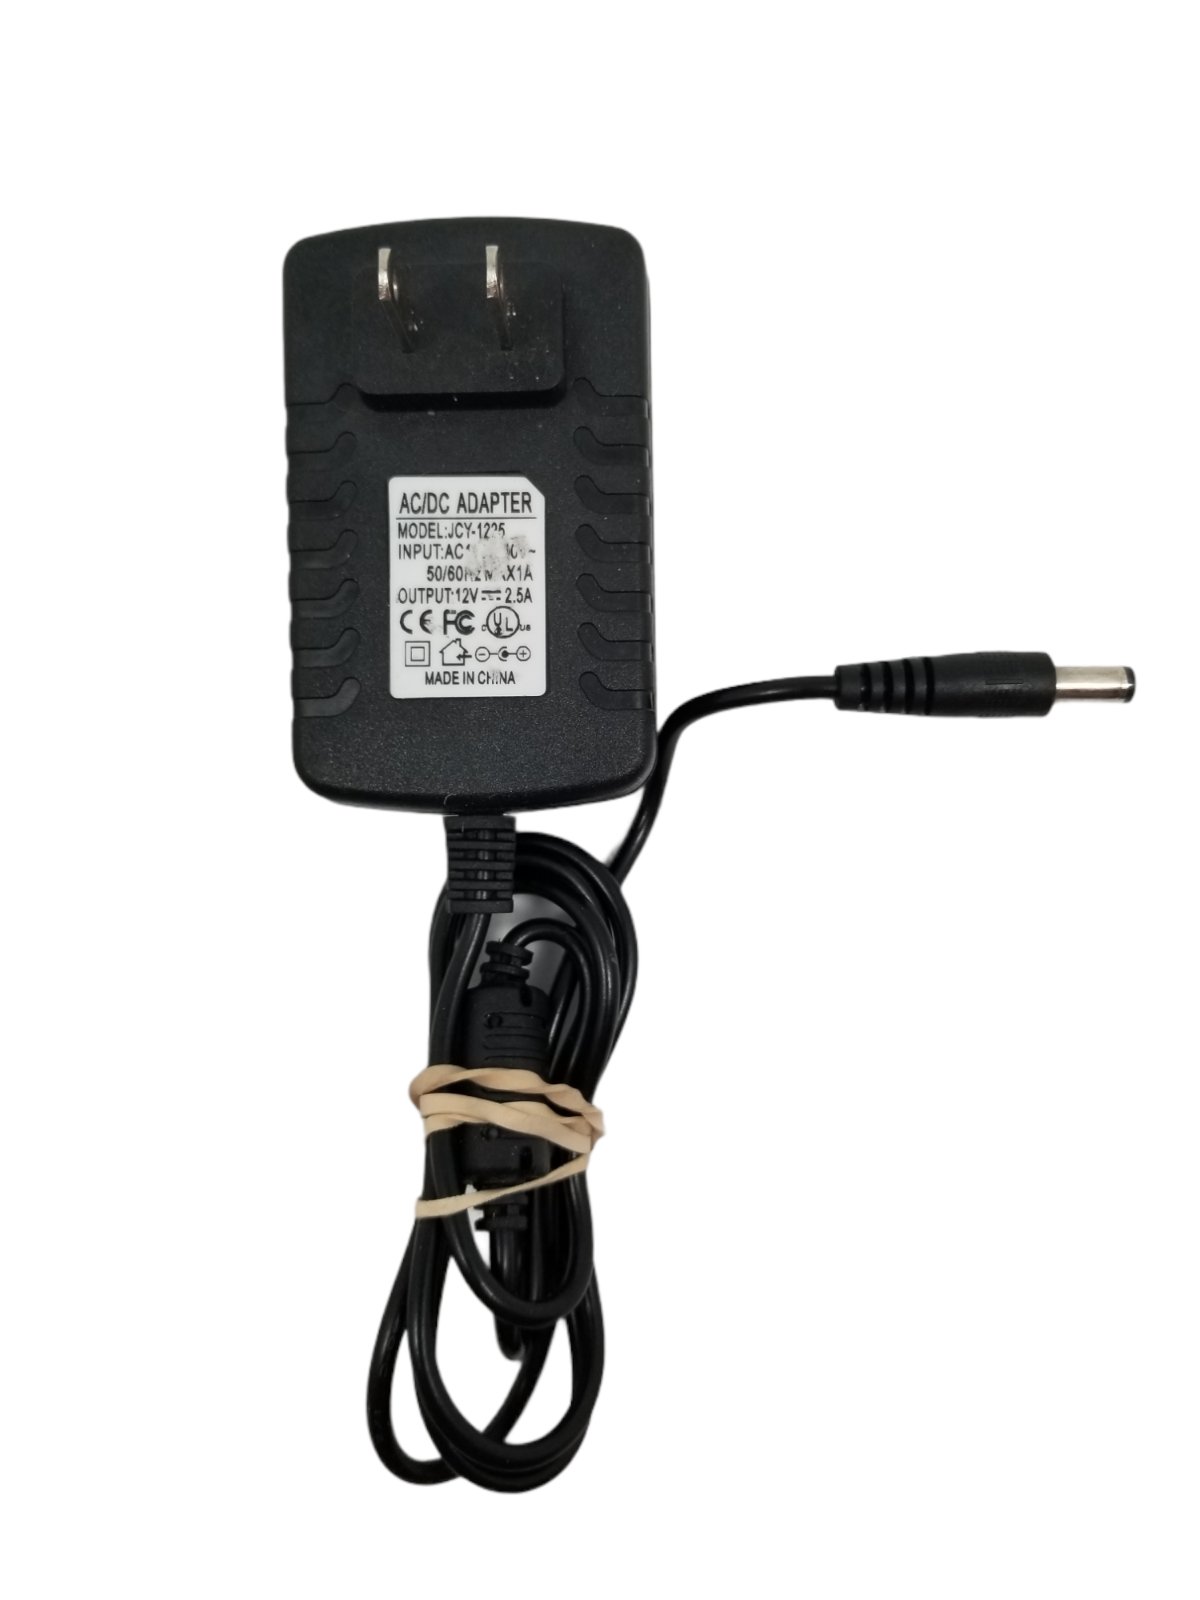 AC Adapter For Tascam PS-1225 PS-1225L Charger Power Supply PSU 12V 2.5A Mains Type: AC/DC Adapter Features: Powere